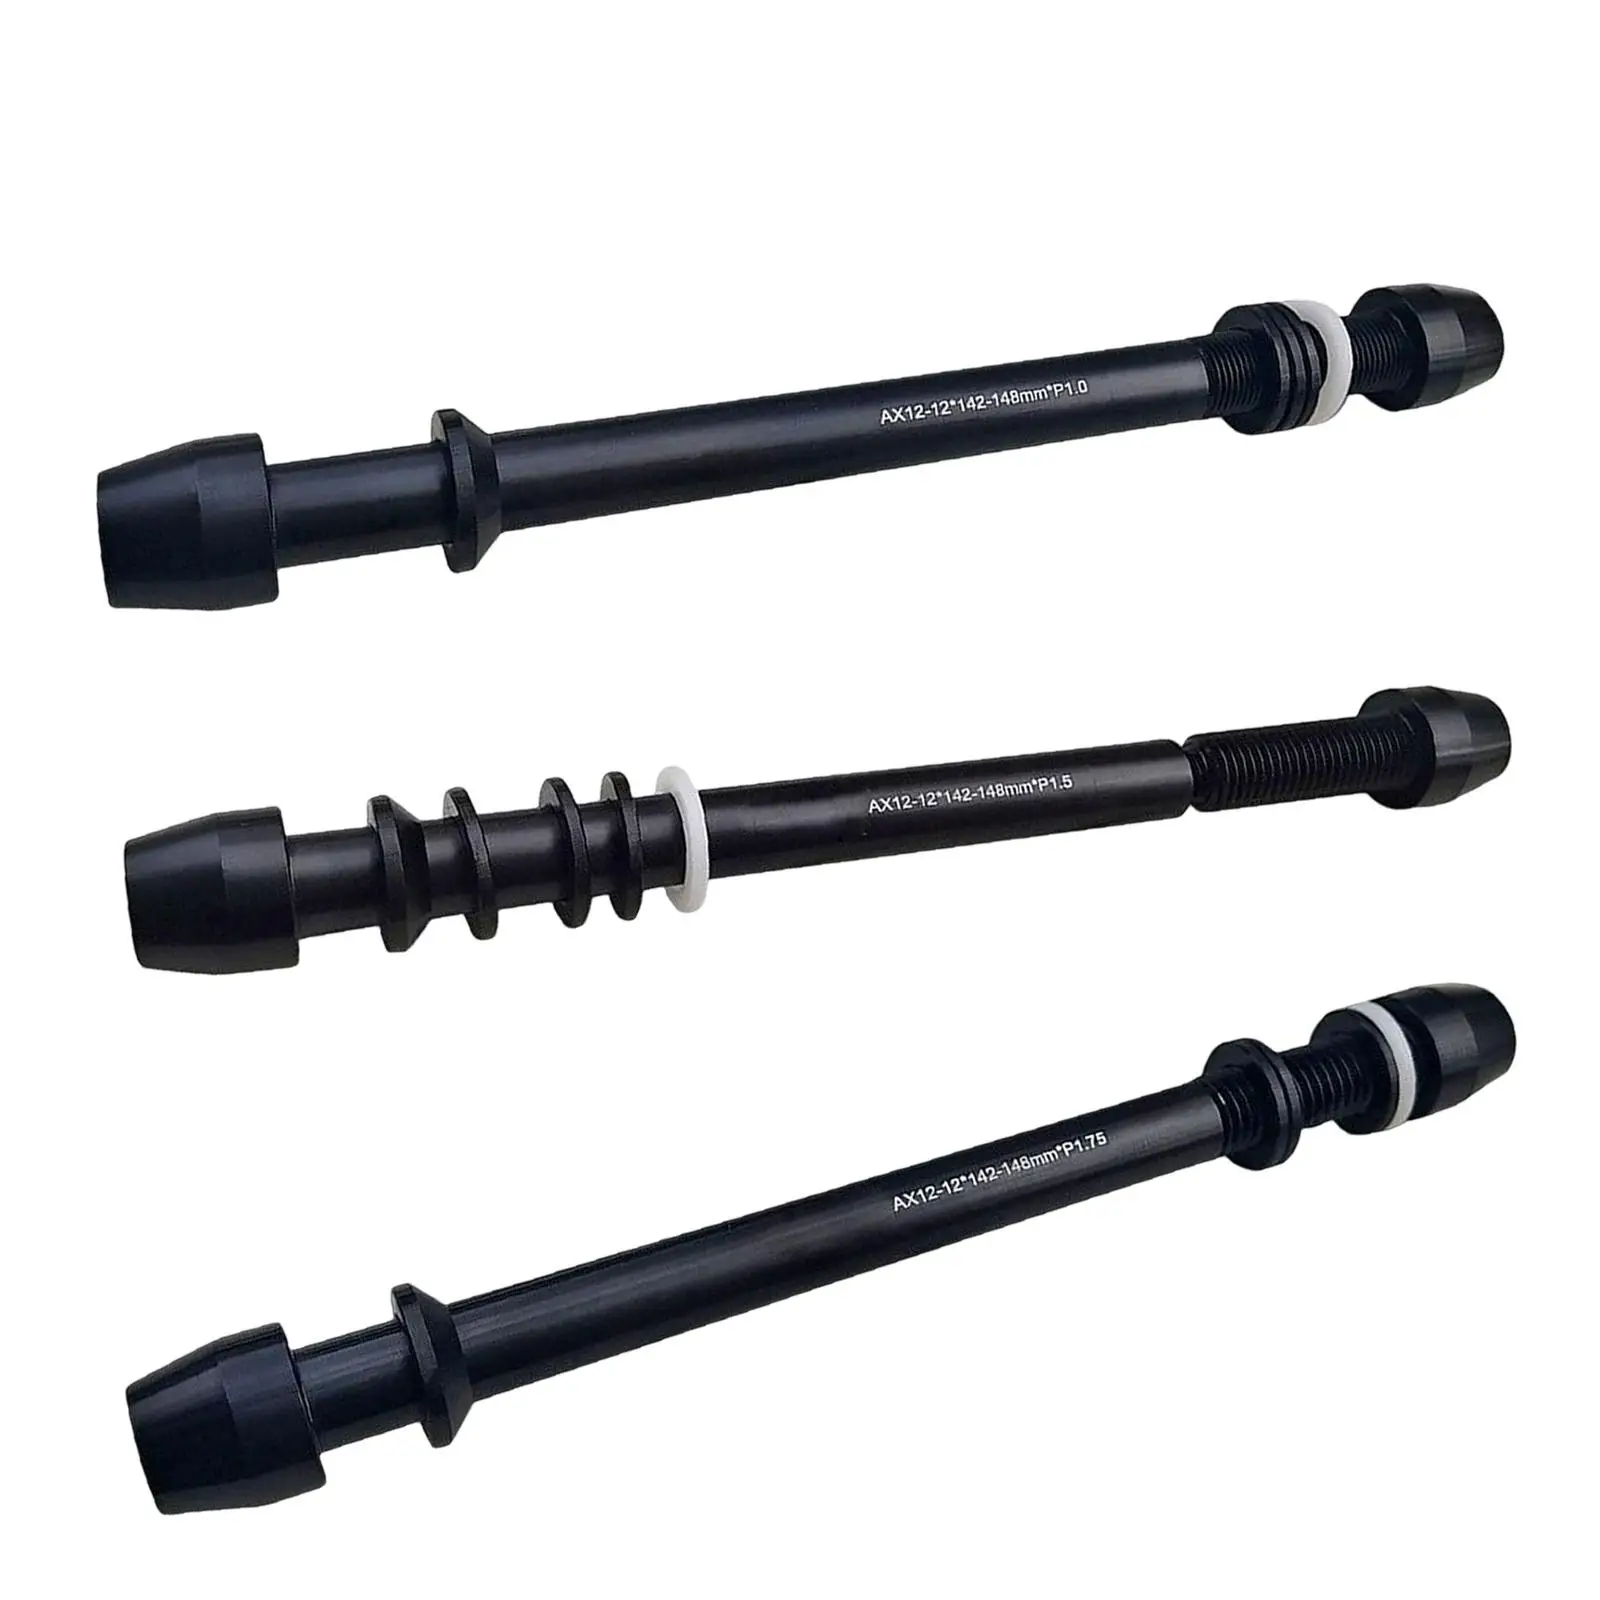 Mountain Bike Barrel Shaft with Wrench Quick Release Skewer Durable Adjustable Repair Parts Release for MTB M12 P1.0/1.5/1.75